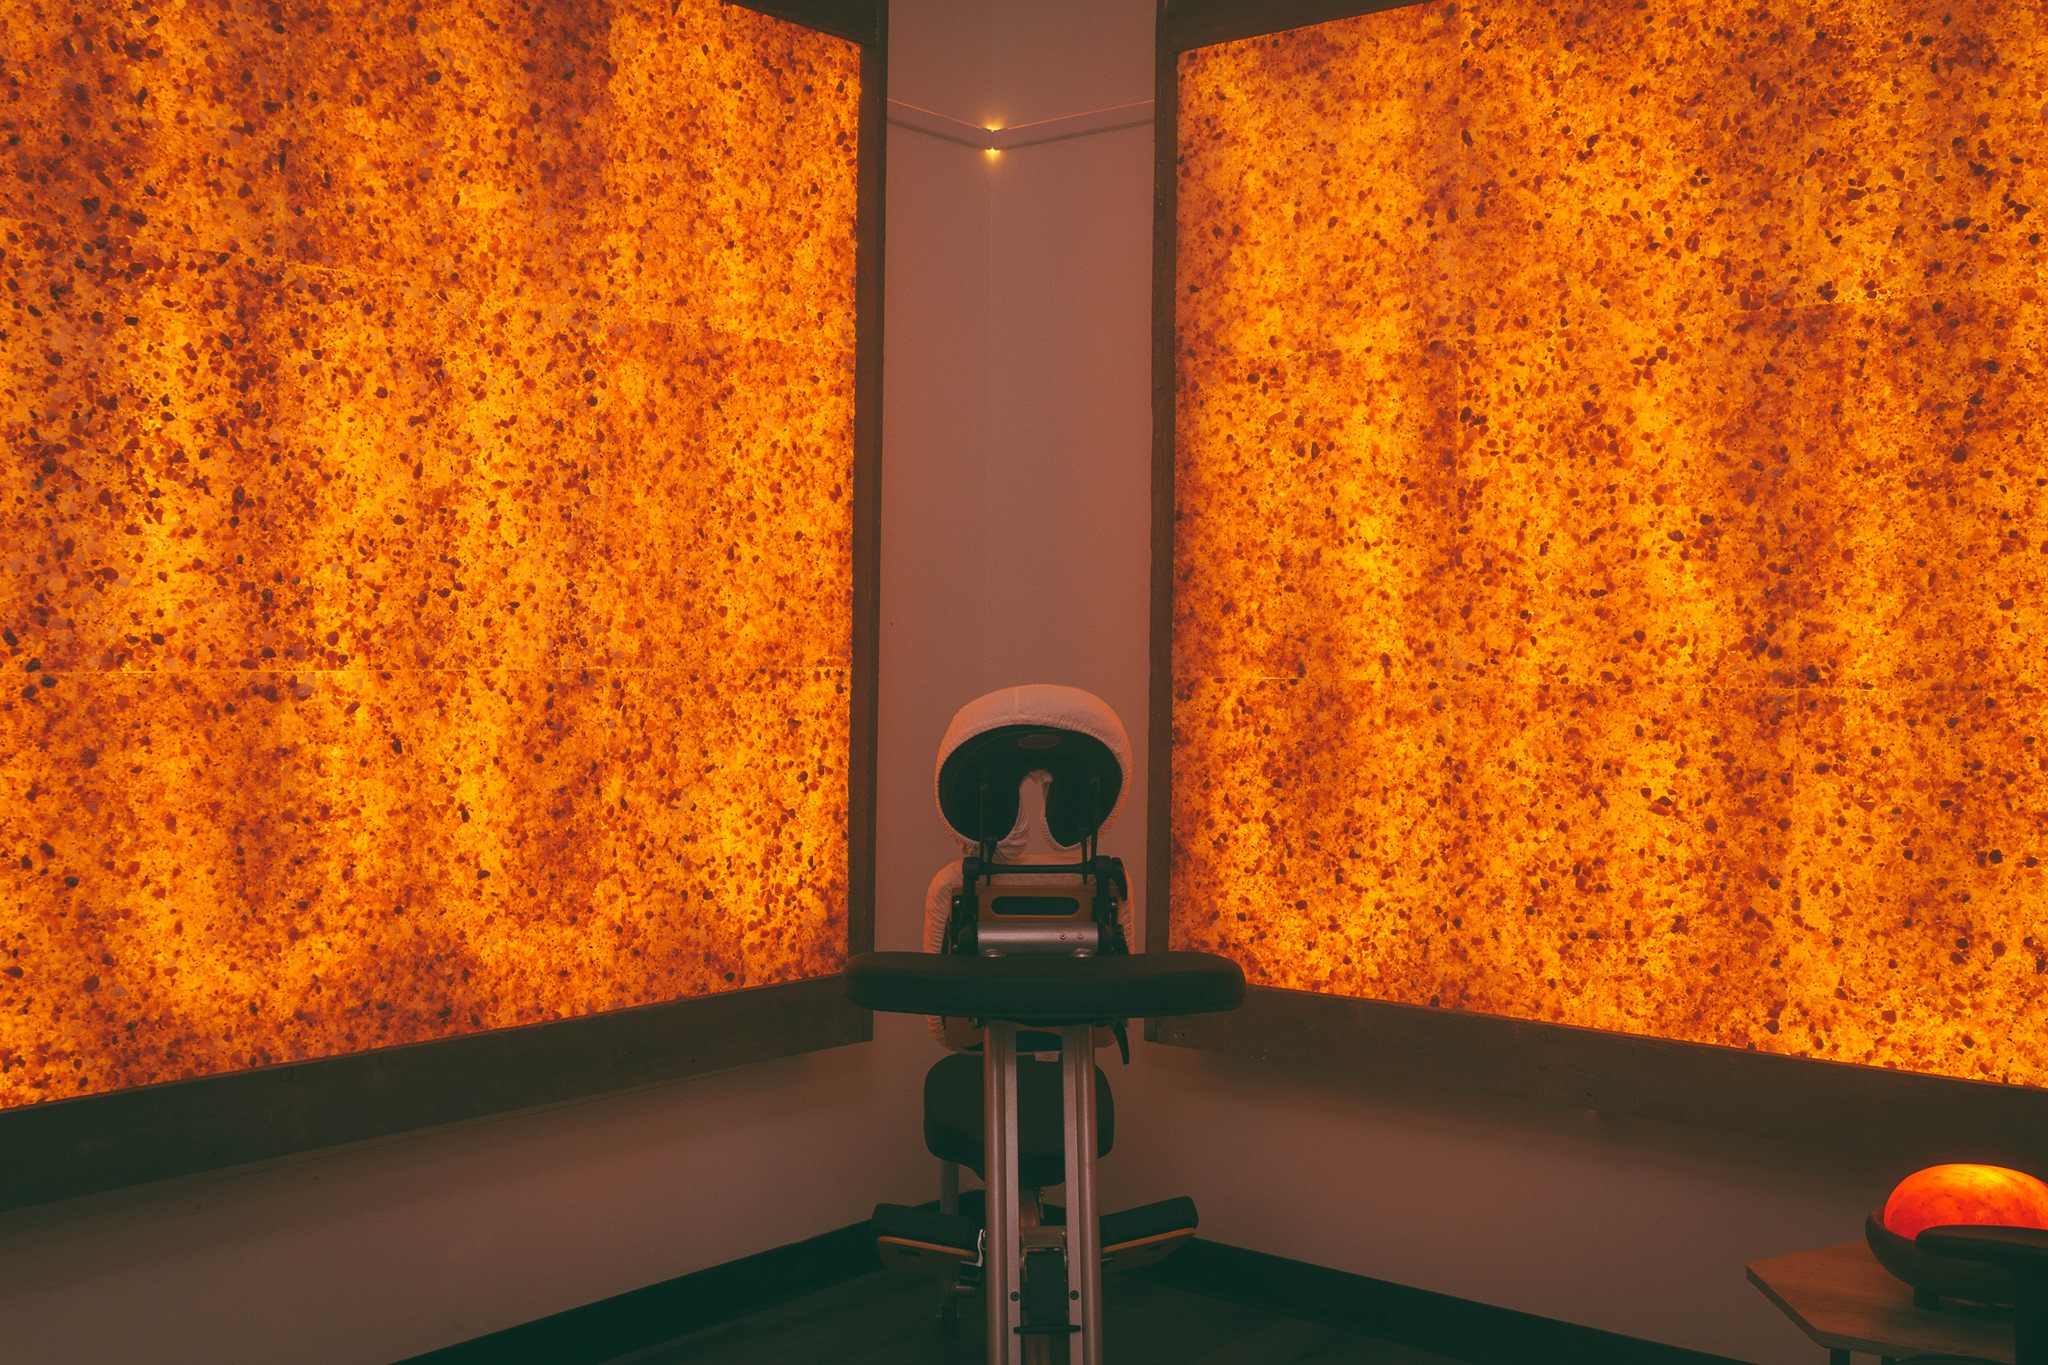 Massage Chair With Two Orange Back Lit Square Panels At The Revelations Holistic Center - Dorval, Quebec, Canada.